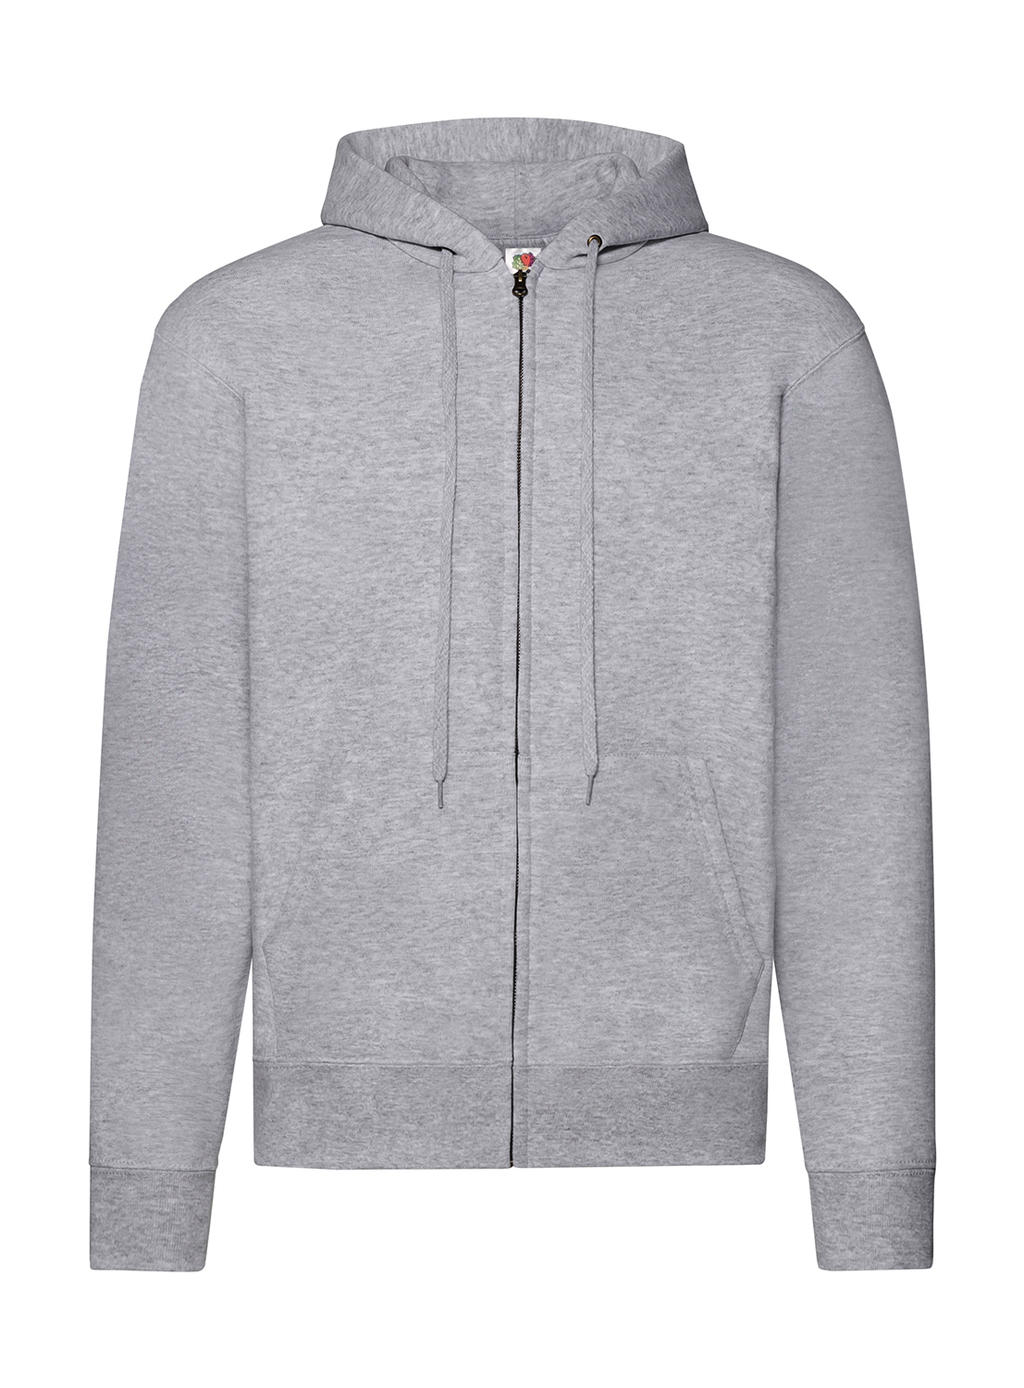  Classic Hooded Sweat Jacket in Farbe Heather Grey